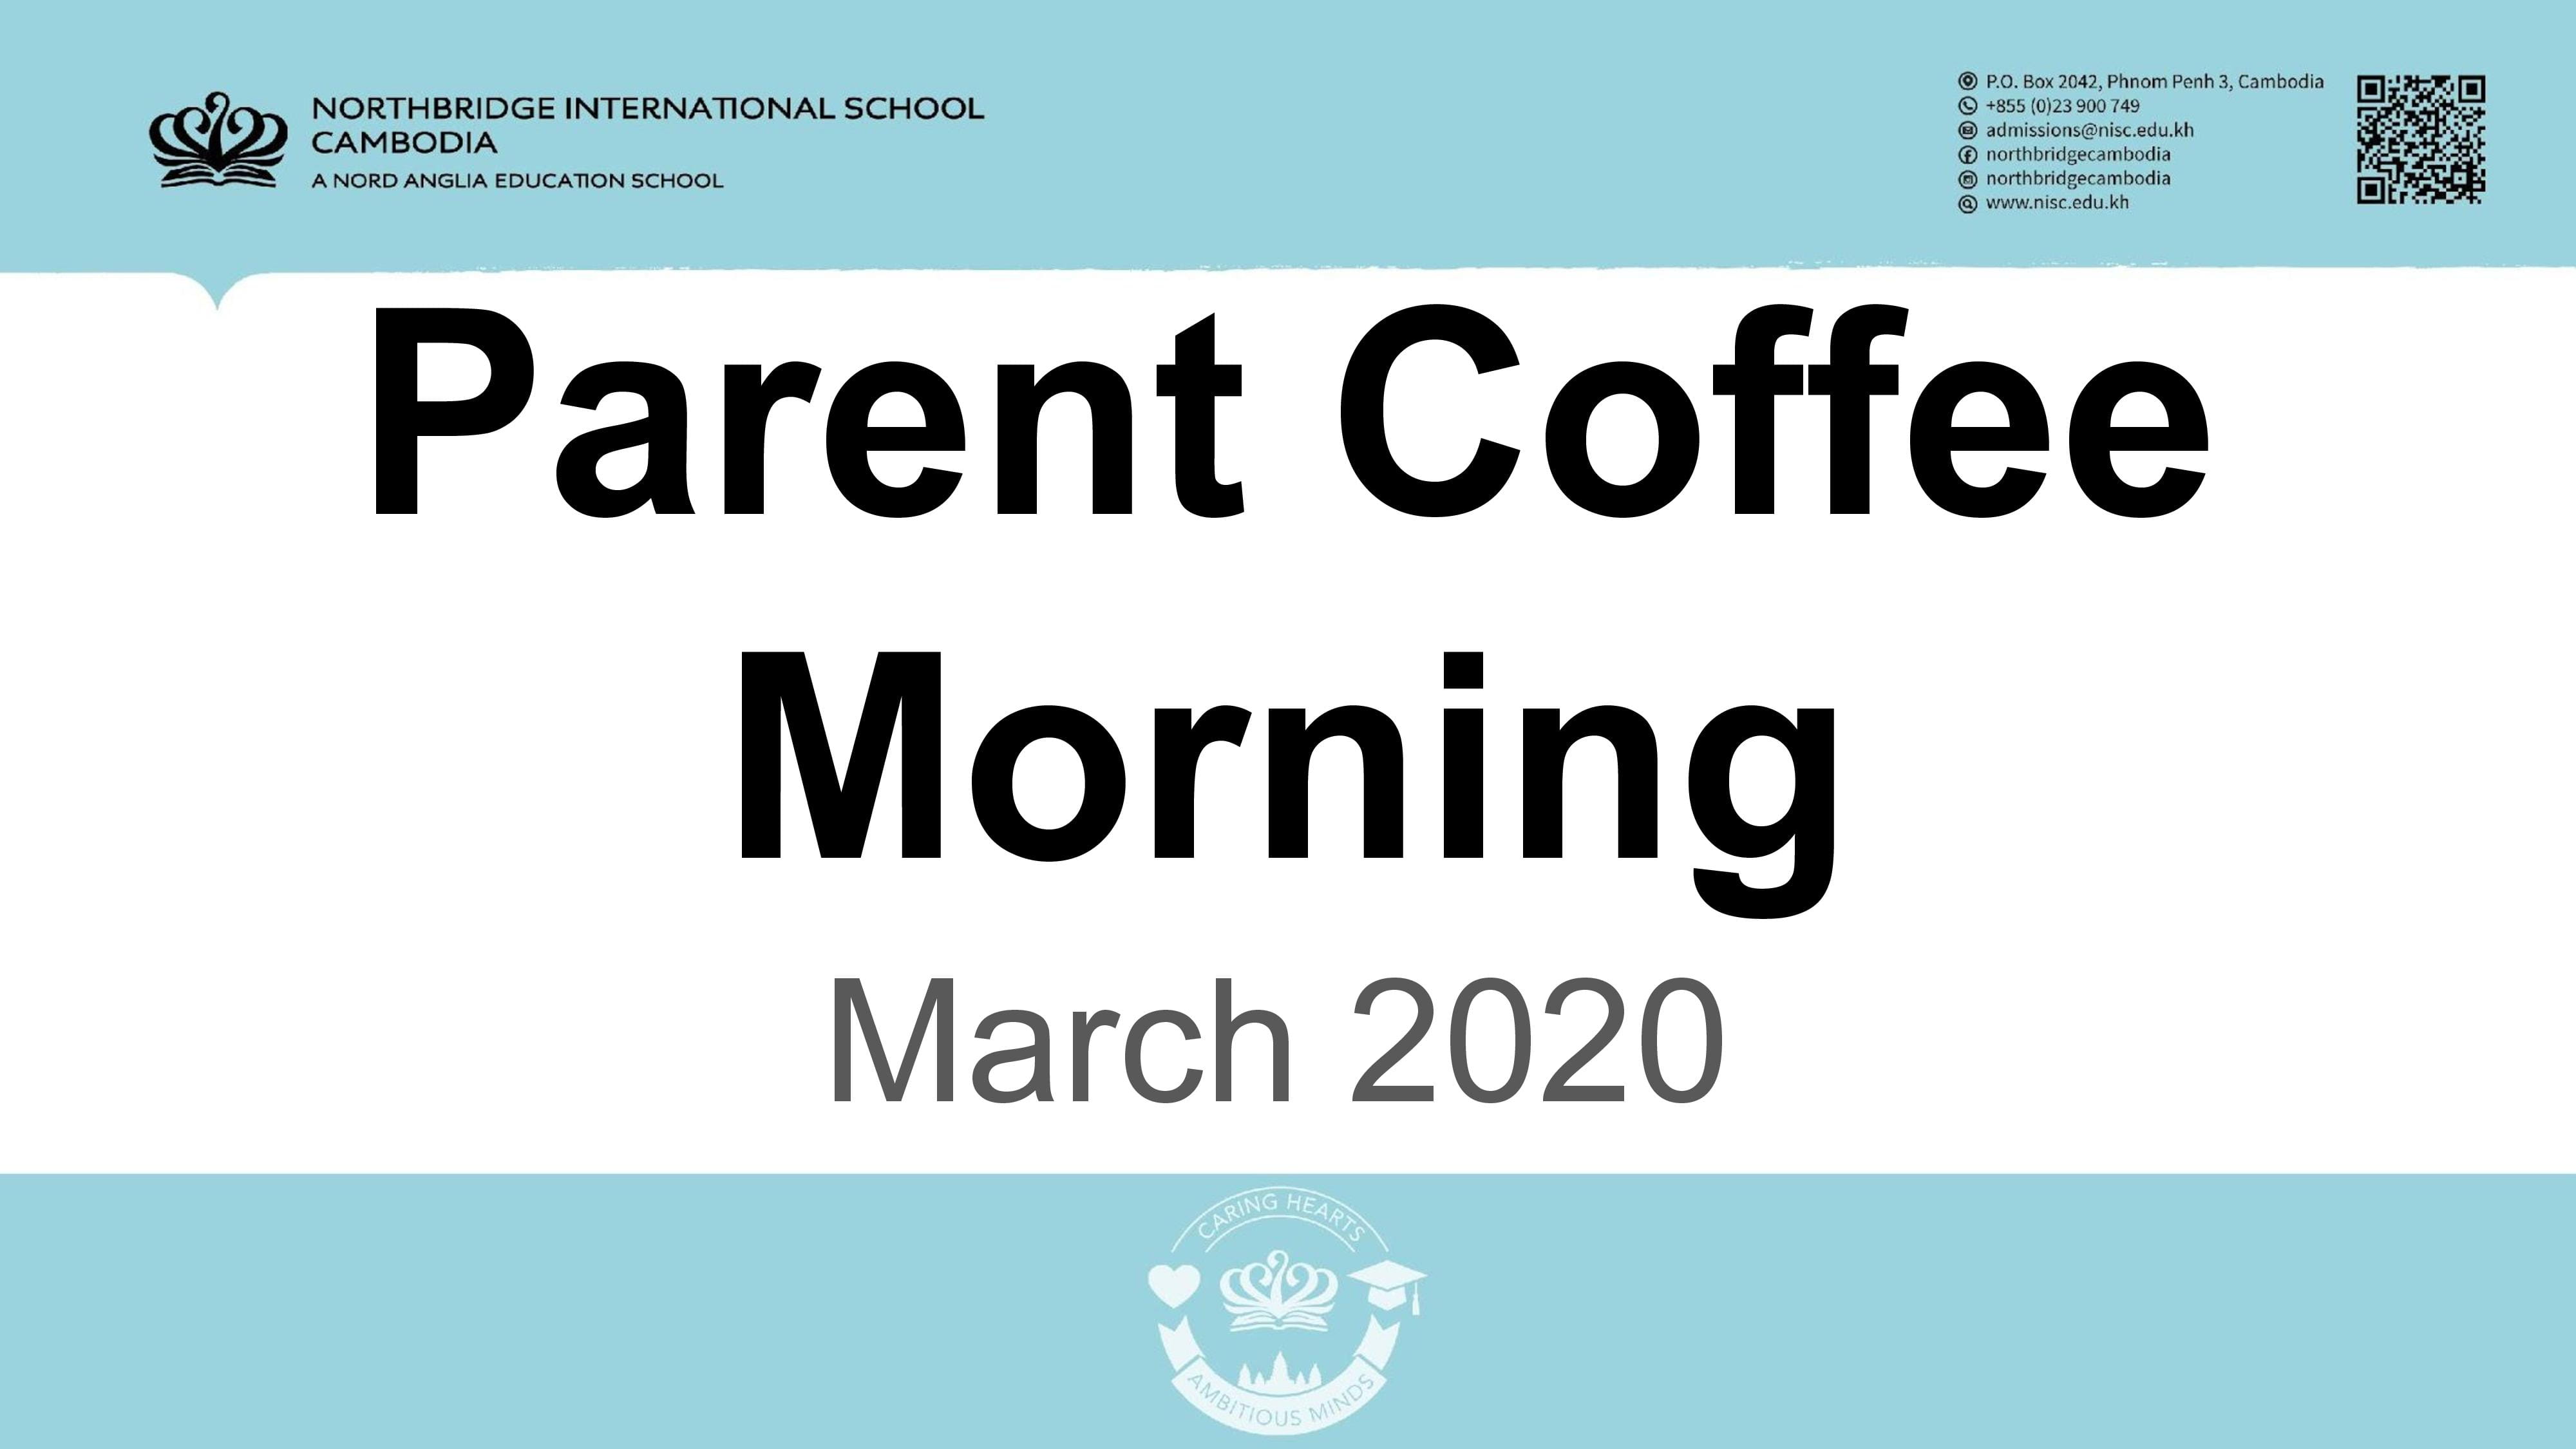 Highlights from the Northbridge Parent Coffee Morning held on Friday 13 March - highlights-from-the-northbridge-parent-coffee-morning-held-on-friday-13-march